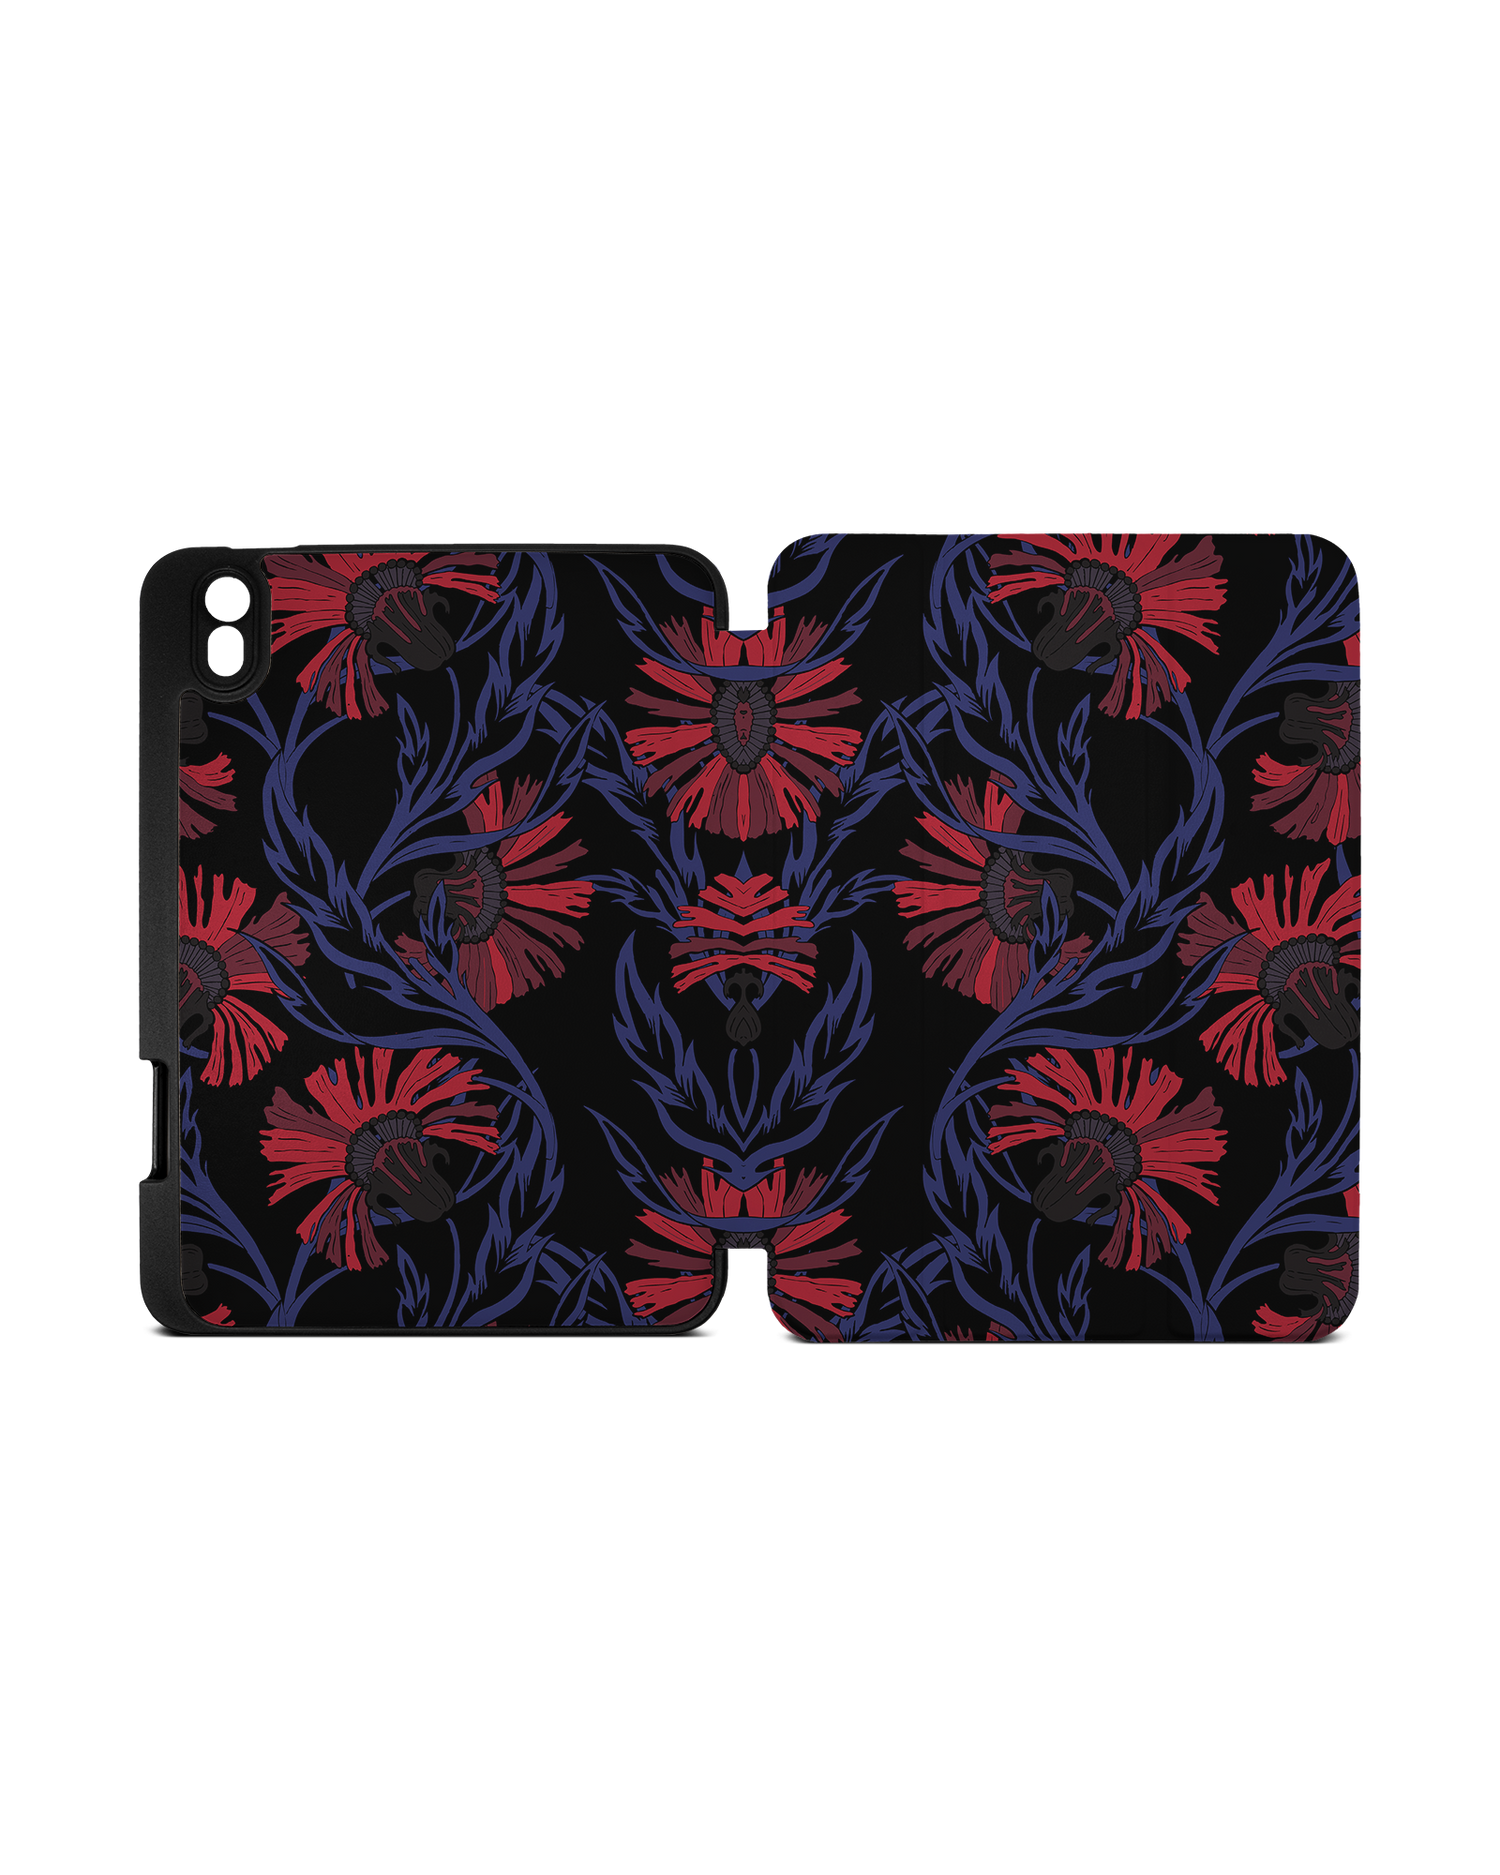 Midnight Floral iPad Case with Pencil Holder Apple iPad mini 6 (2021): Opened exterior view